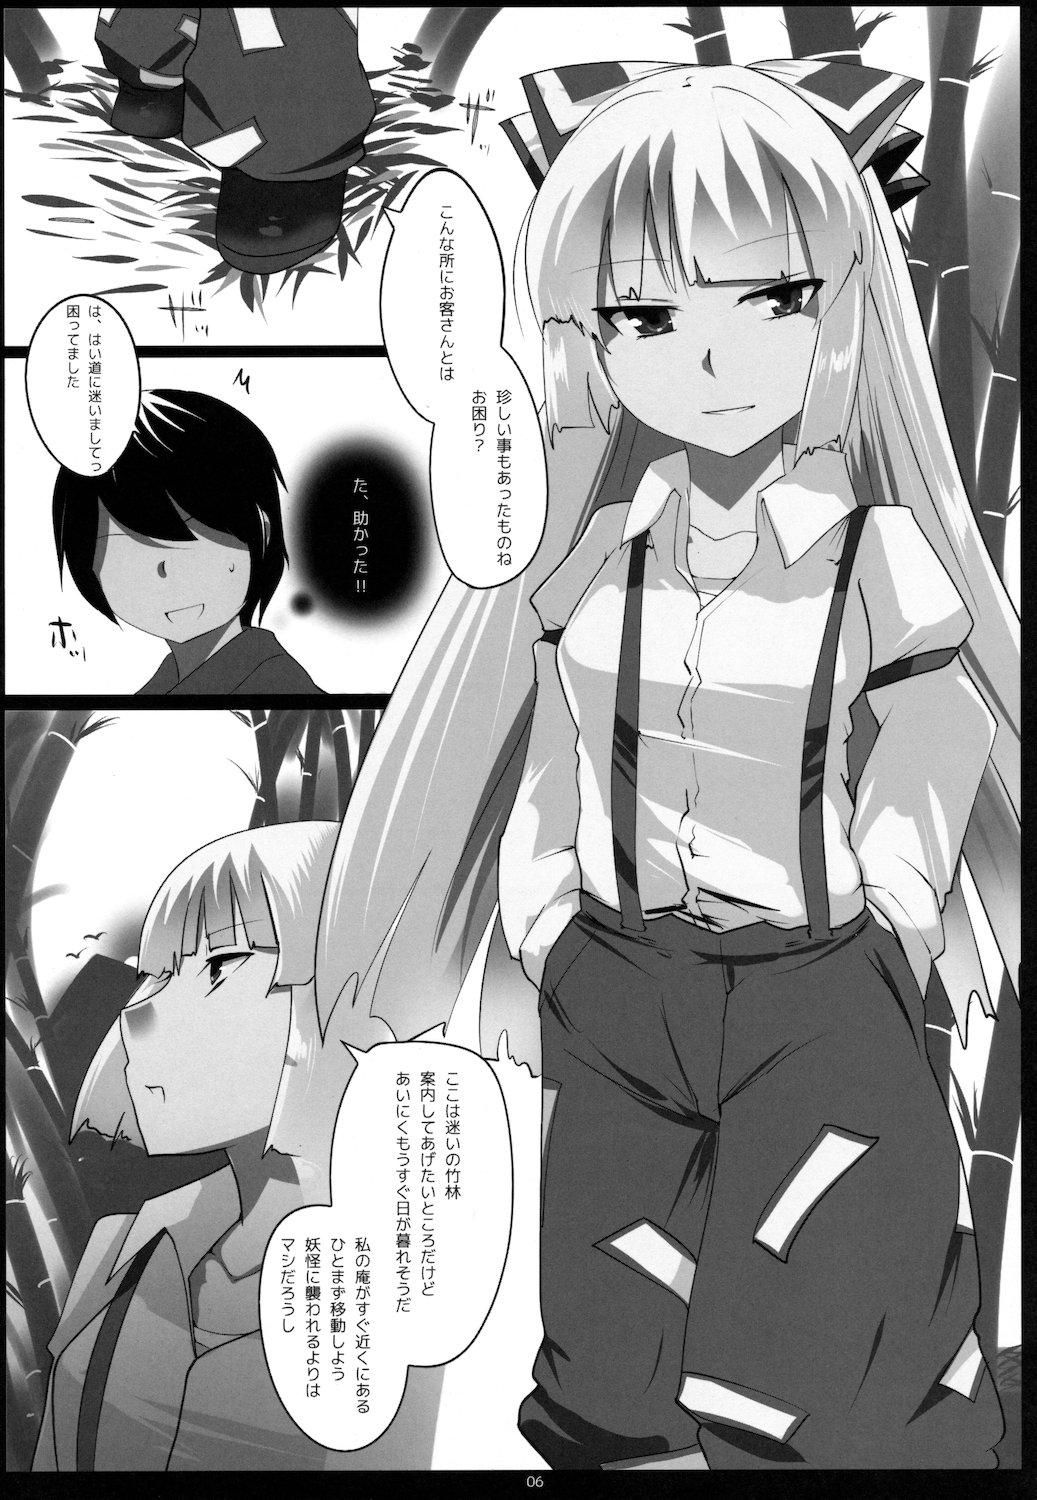 Old Touhou Dere Bitch 7 - Touhou project Viet - Page 6